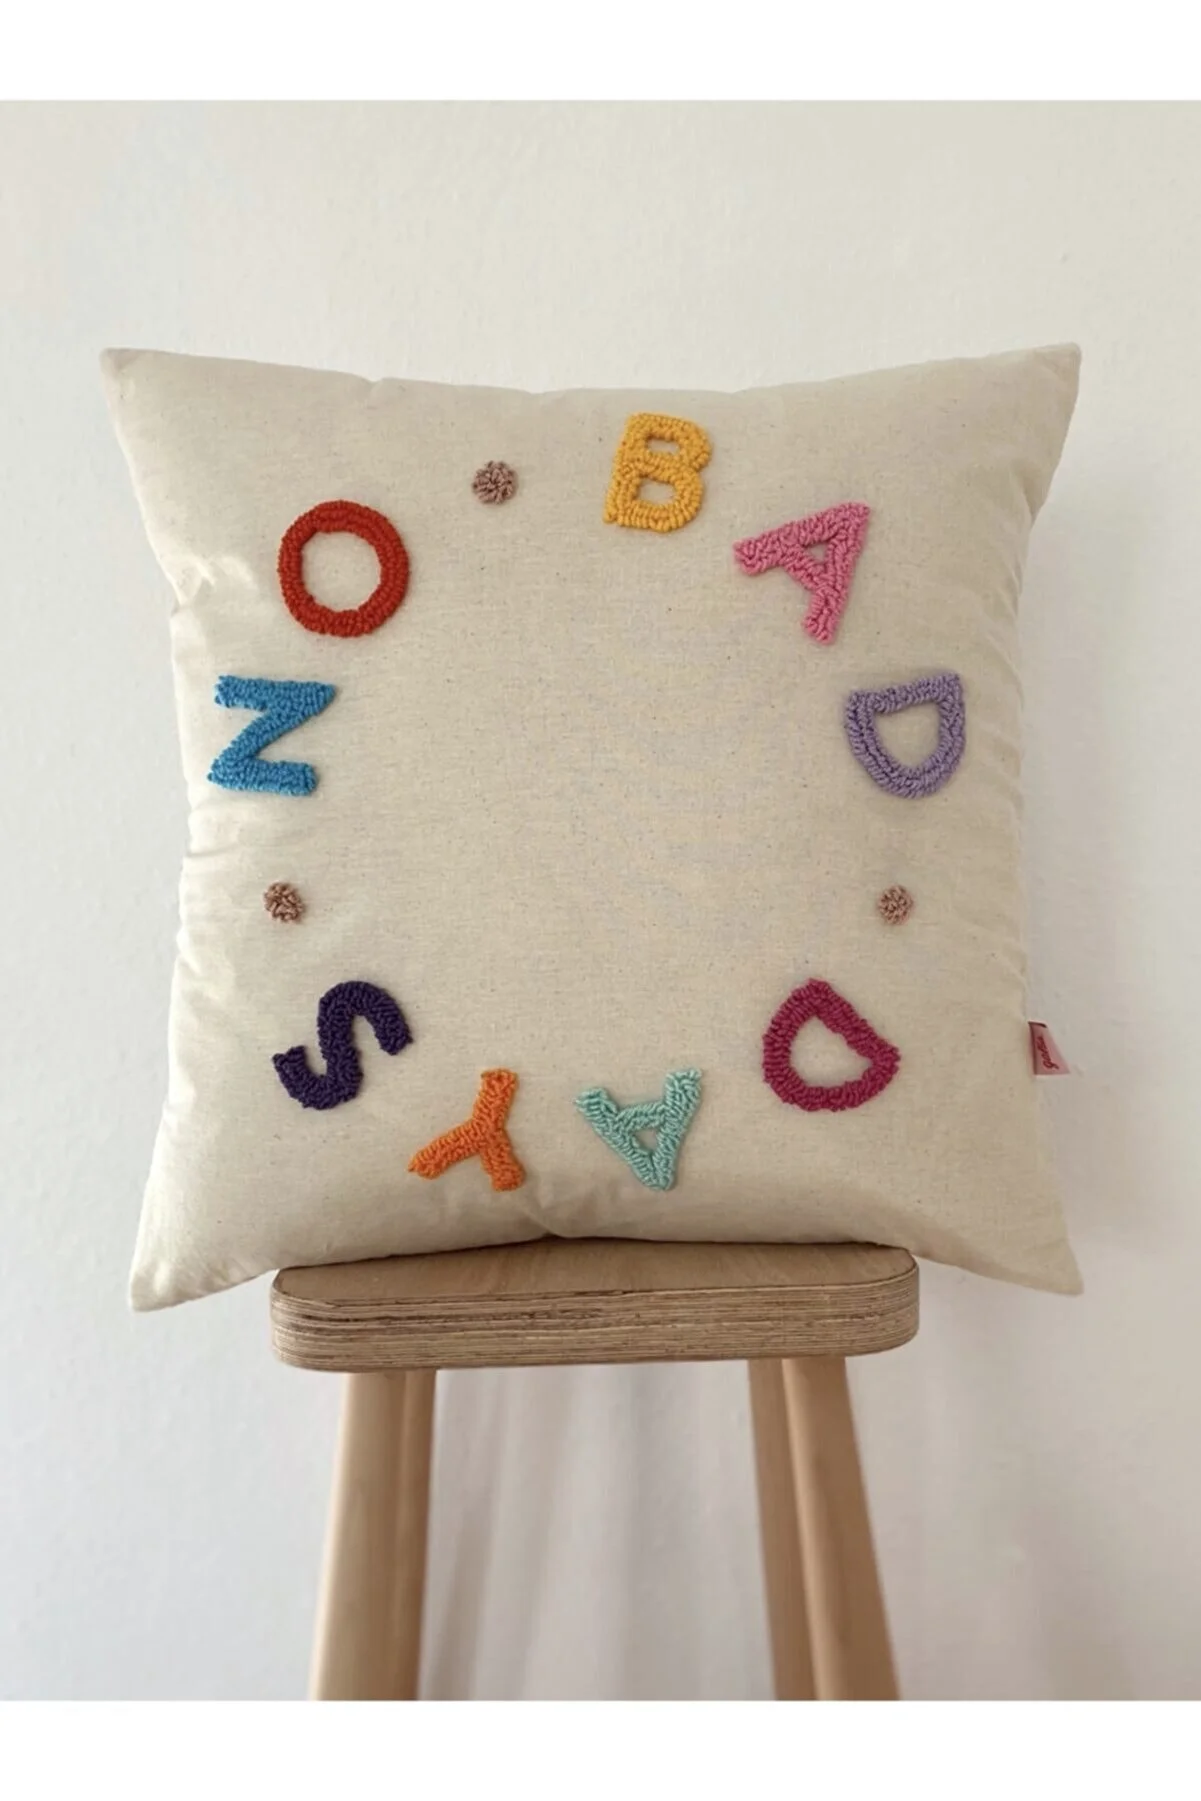 No Bad Days Washed Linen Punch Cushion Pillow Cover Colorful